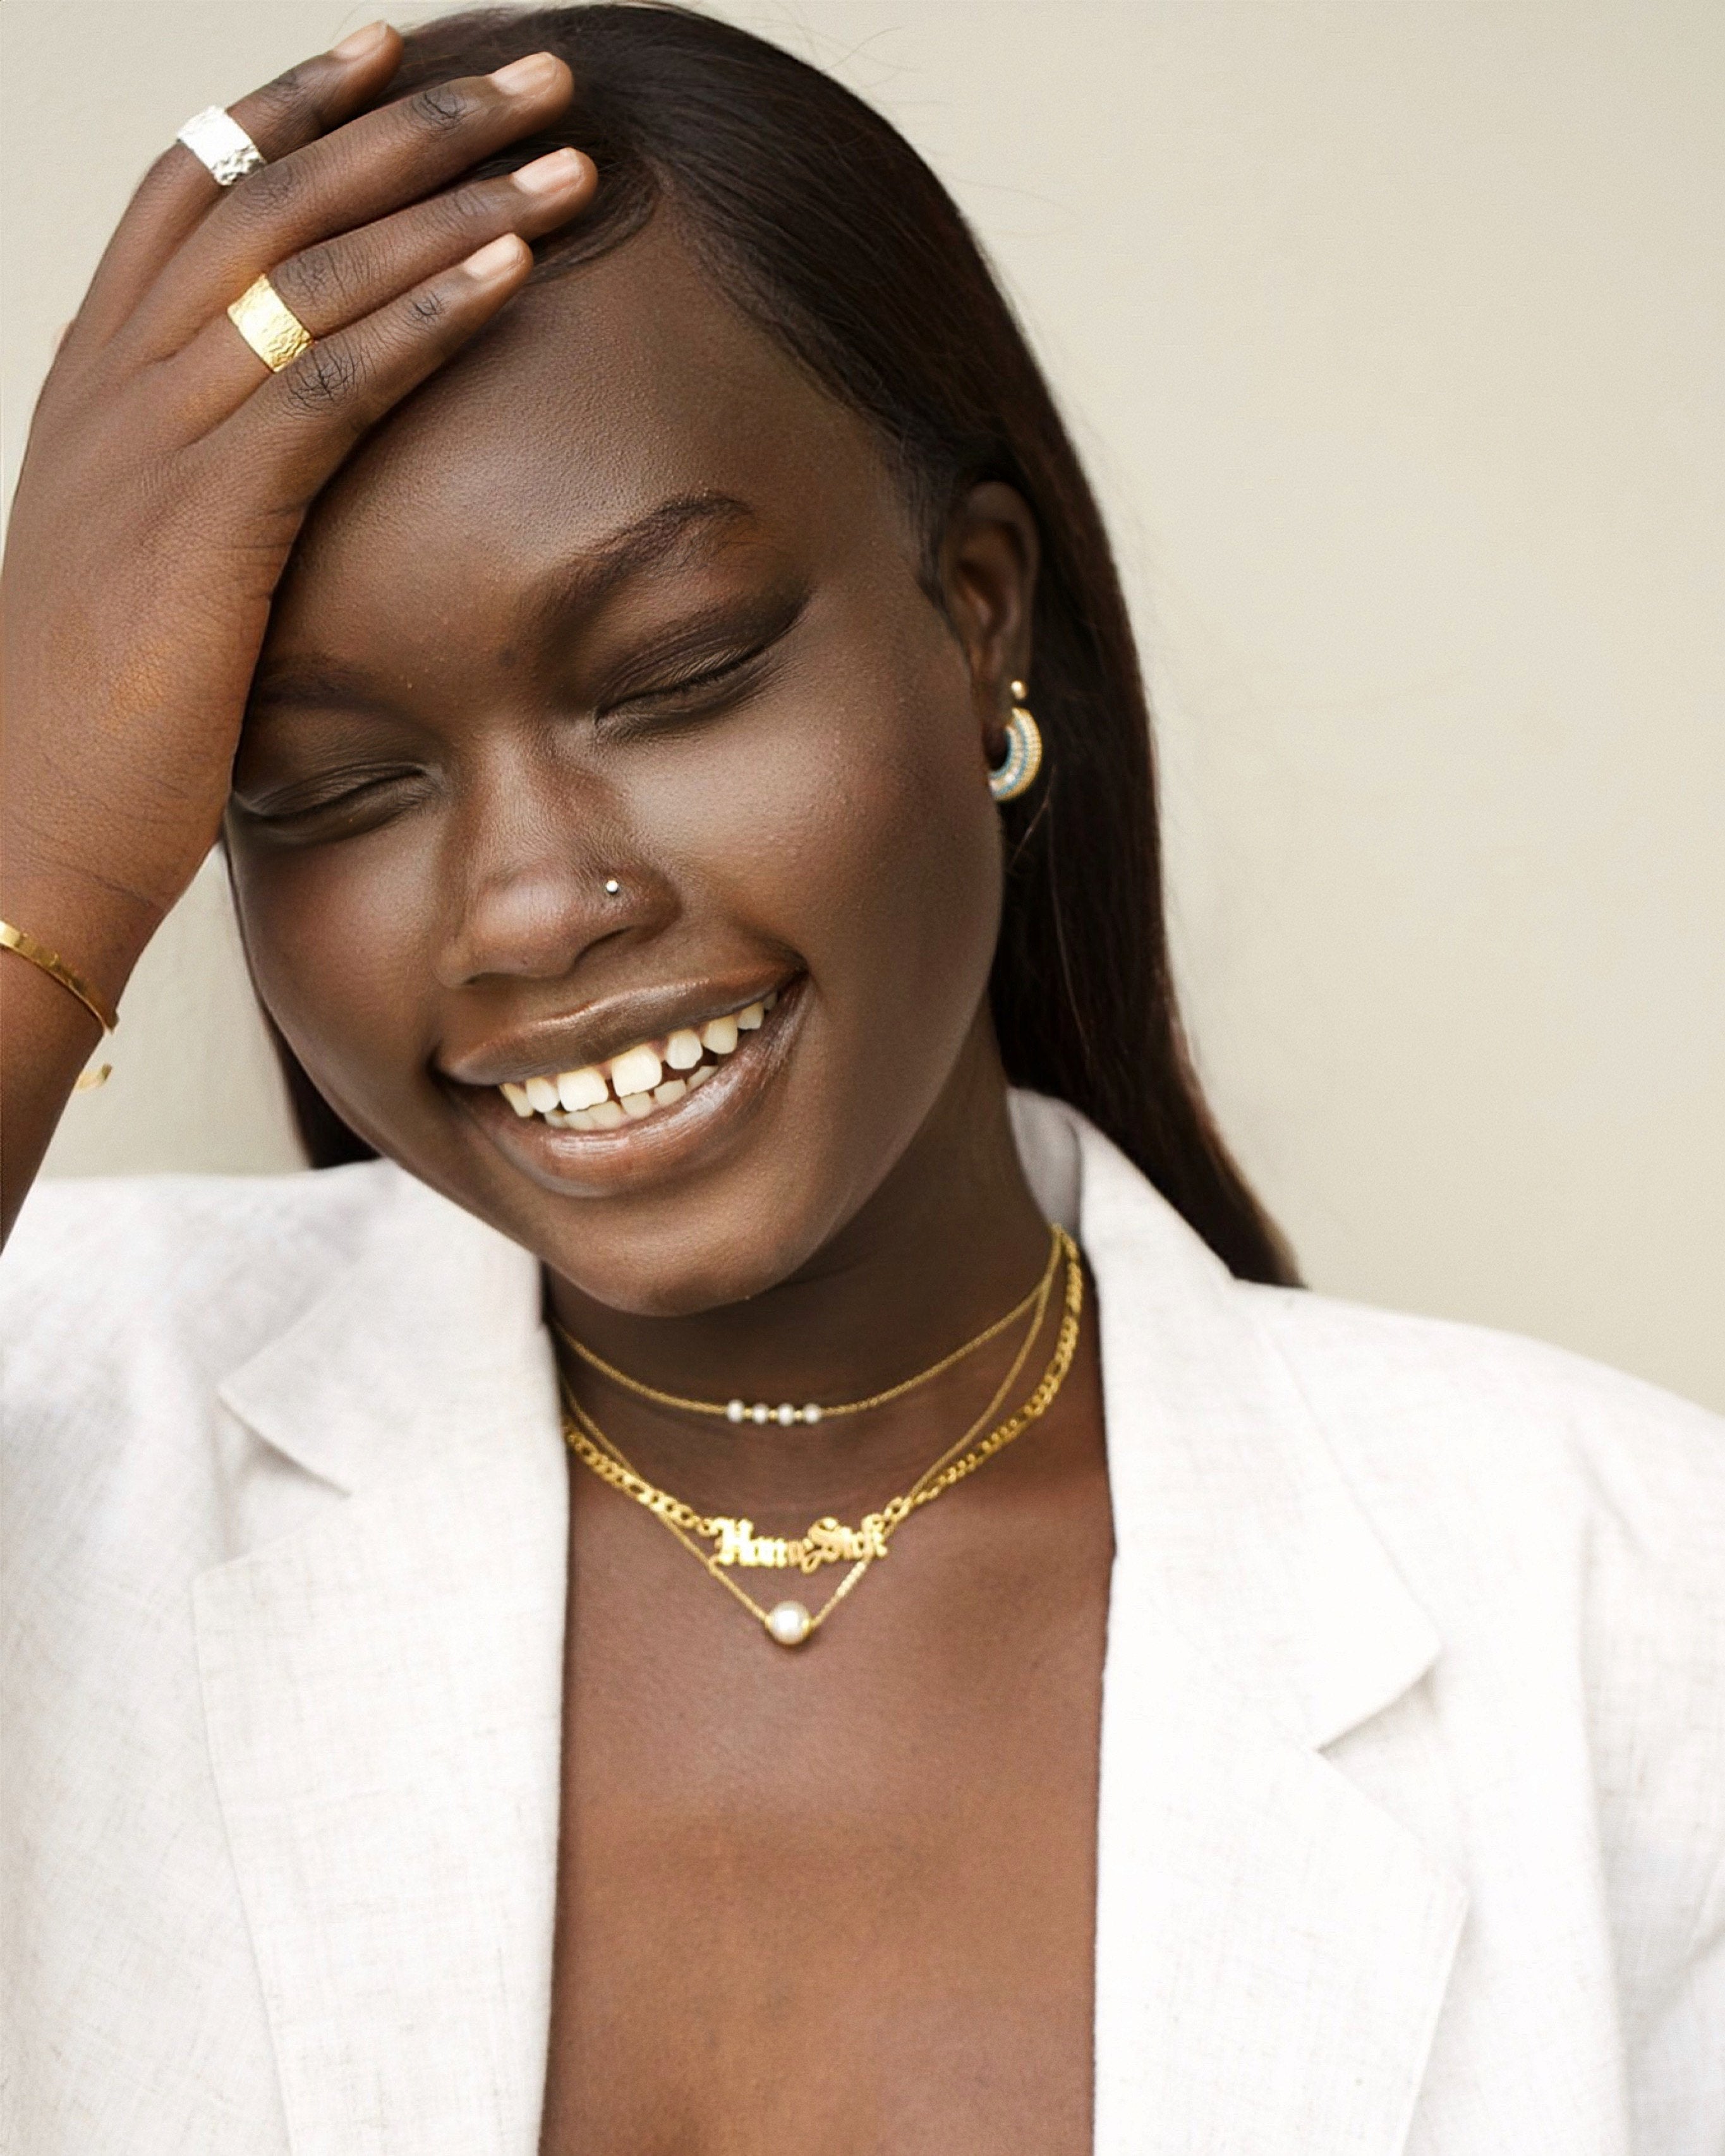 FAX Jewelry | Single Pearl Necklace, Gold Plated | Layered Look on model